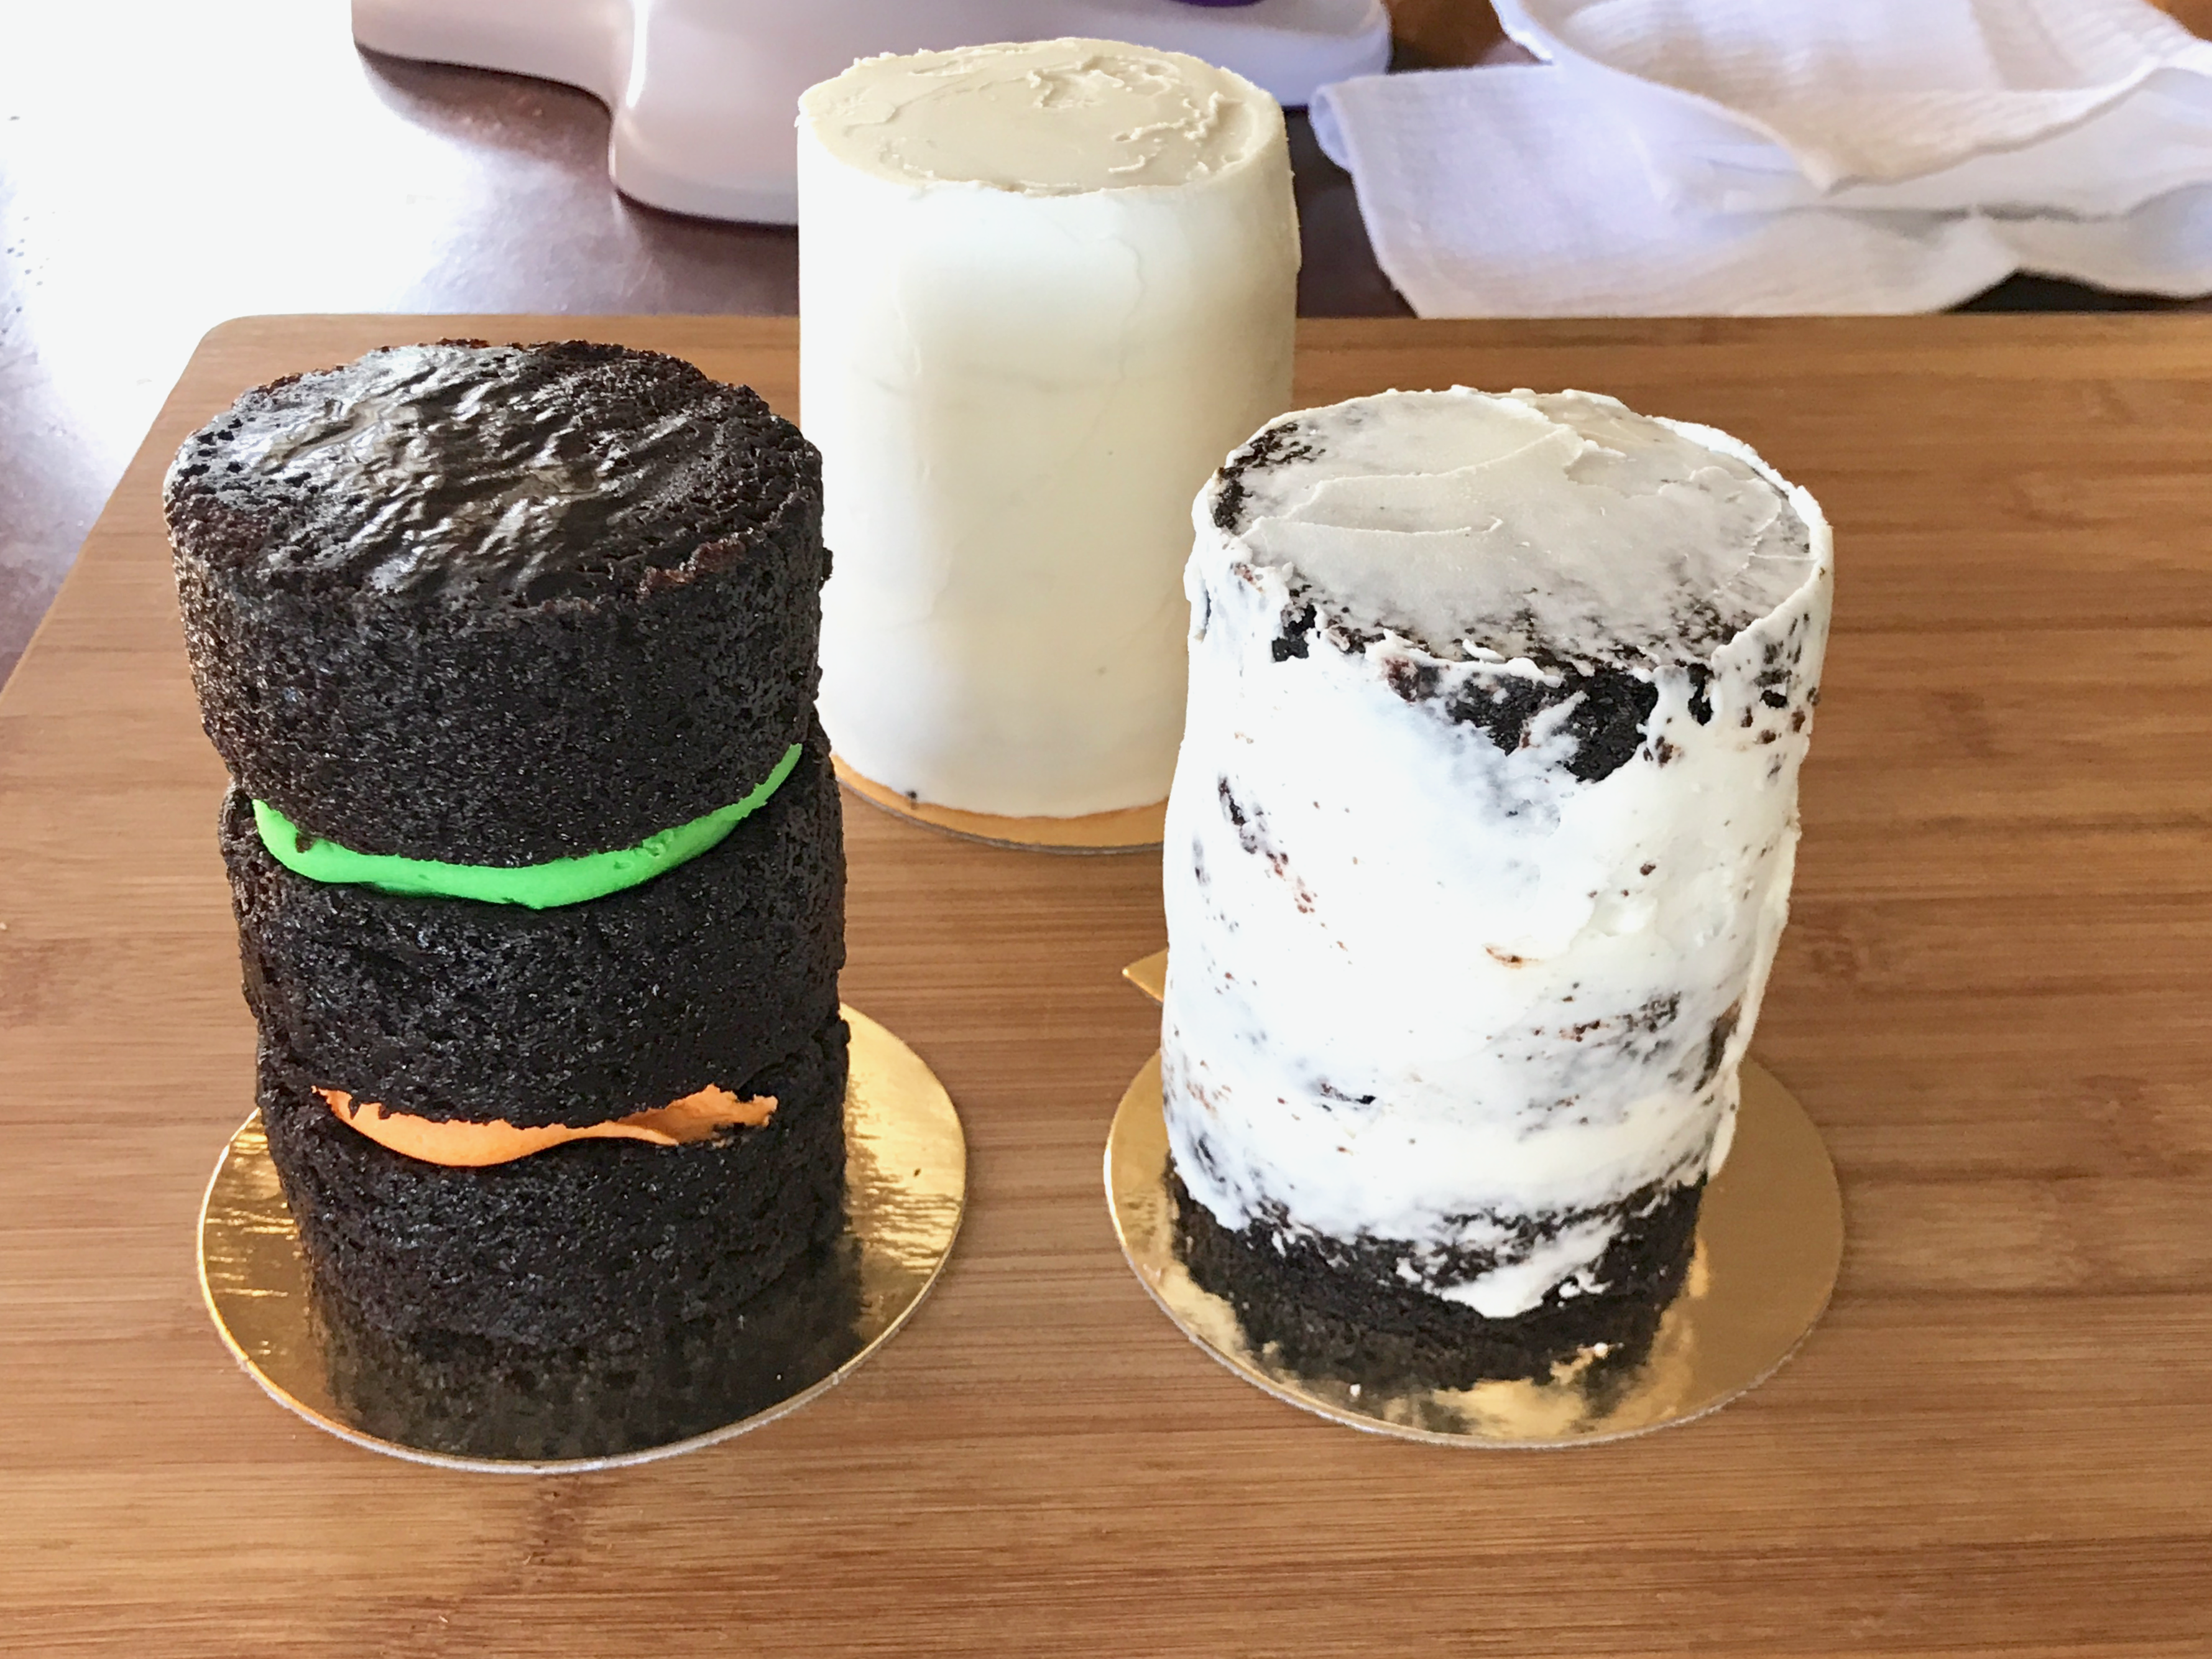 Three 3 layer mini chocolate halloween cakes each in a different state of completion. One naked, one crumb coated, one completely frosted. 